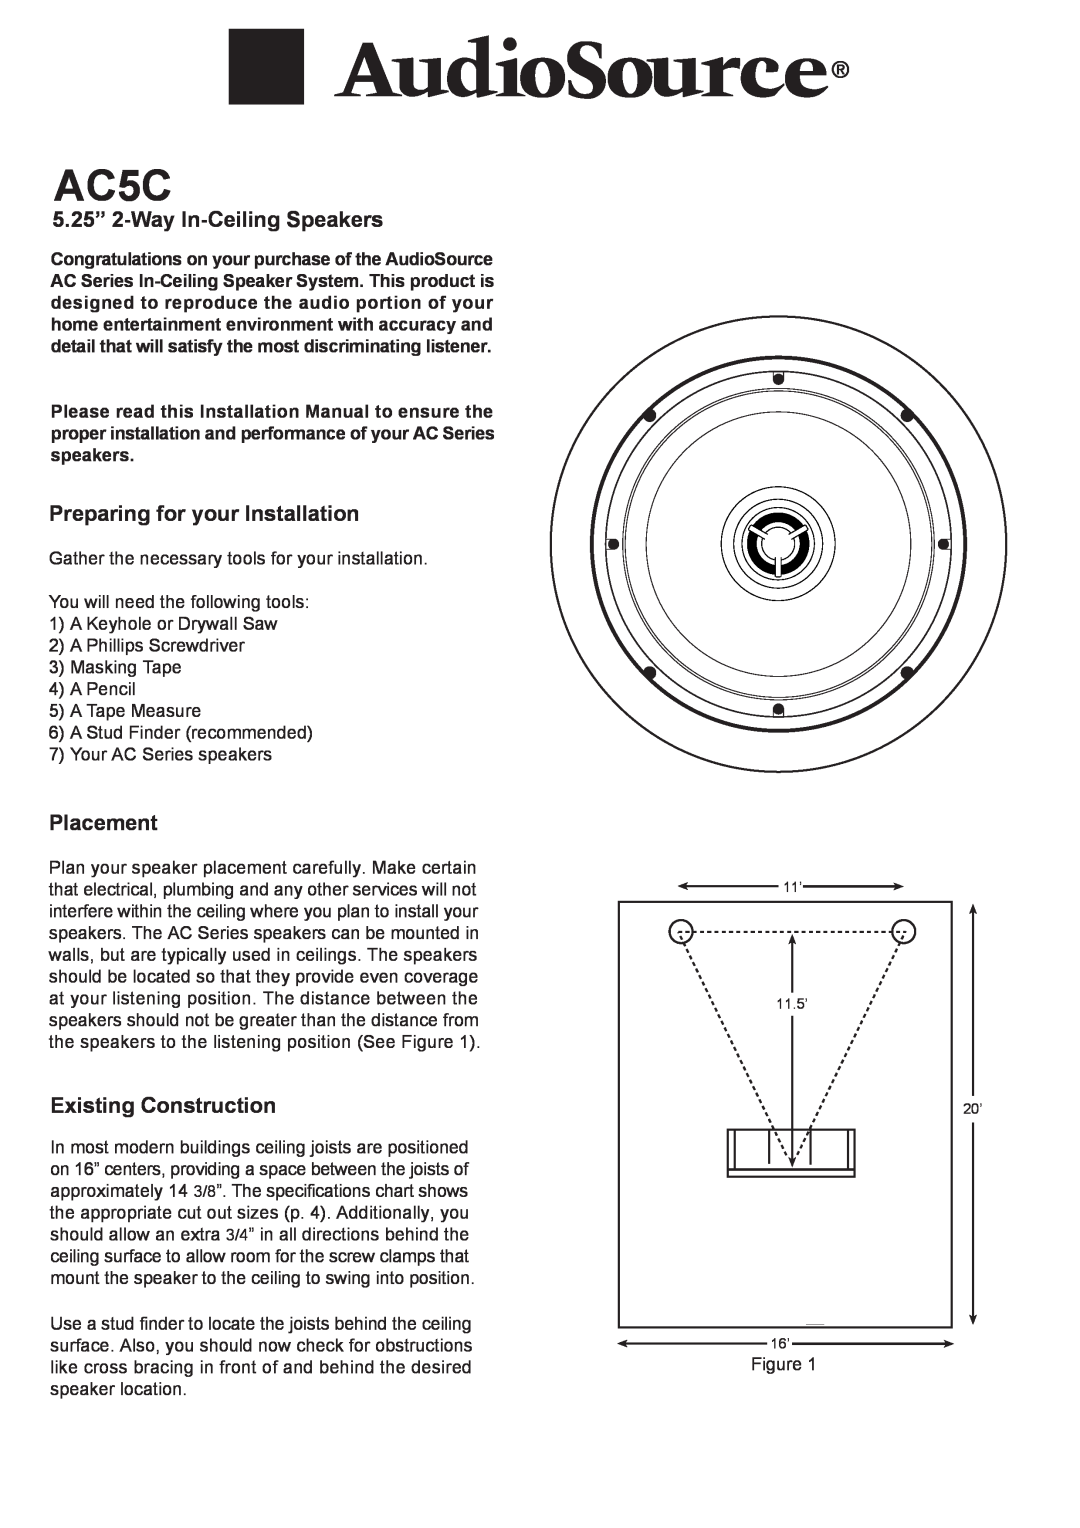 AudioSource AC5C installation manual 5.25” 2-Way In-CeilingSpeakers, Preparing for your Installation, Placement 